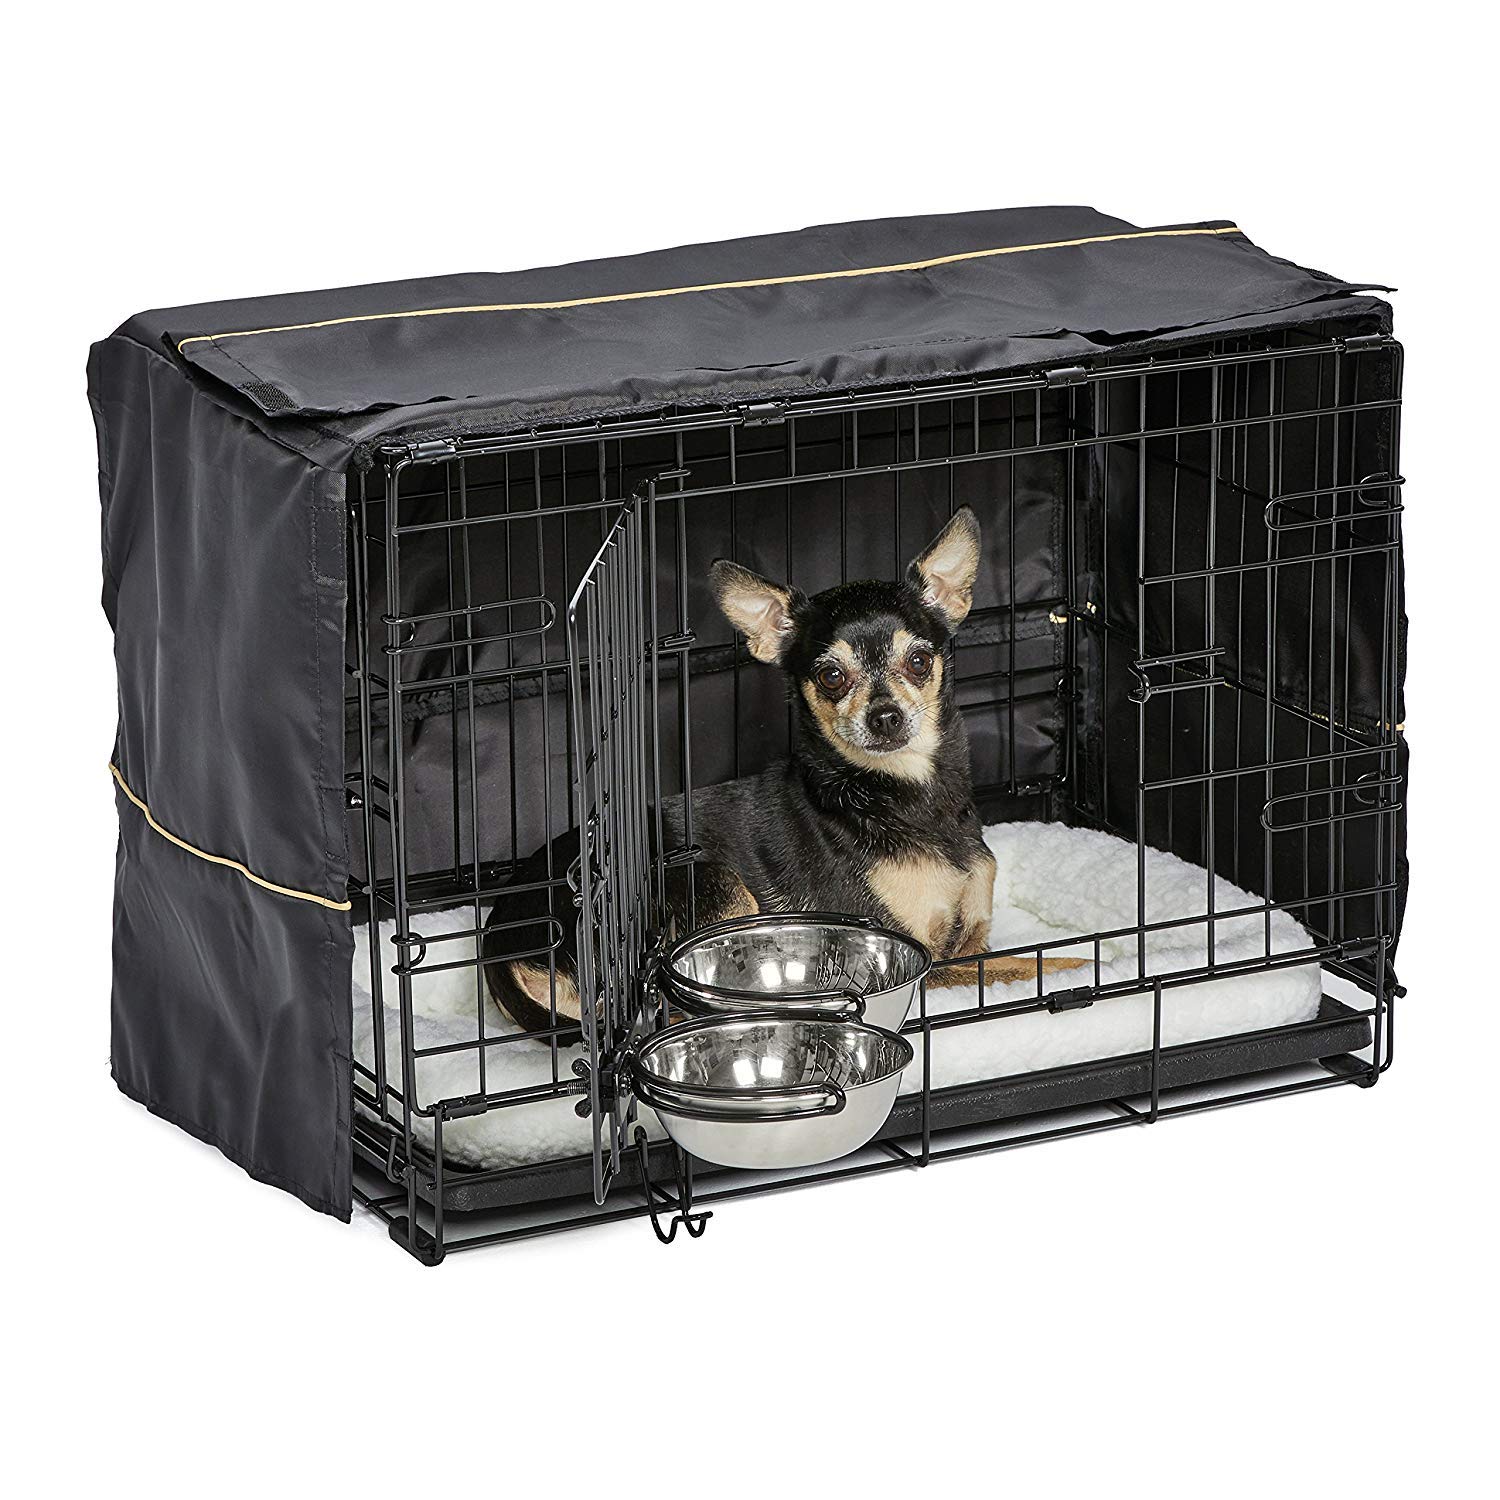 MidWest Homes for Pe icrate Dog crate Starter Kit 22-Inch Dog crate Kit Ideal for XS Dog Breeds (weighing up to 12 Pounds) Includes Dog crate Pet Bed